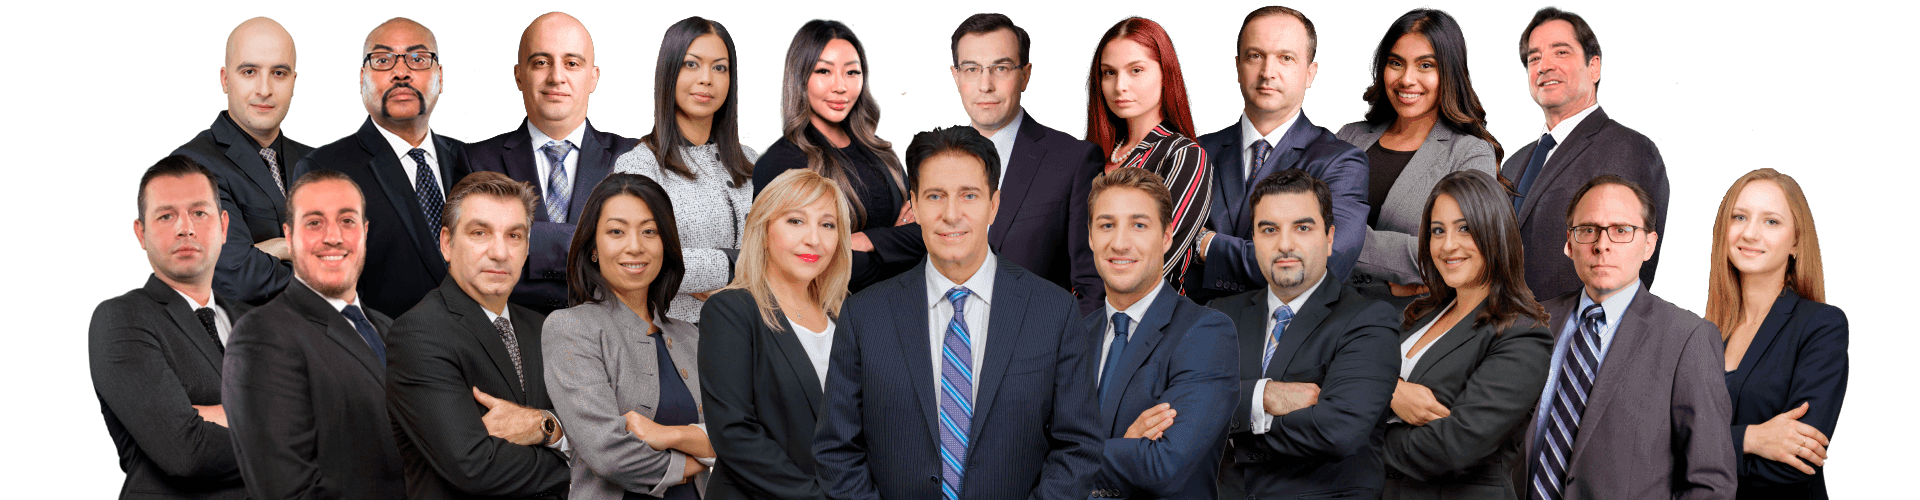 Our Team - Grillo Law Personal Injury Lawyers